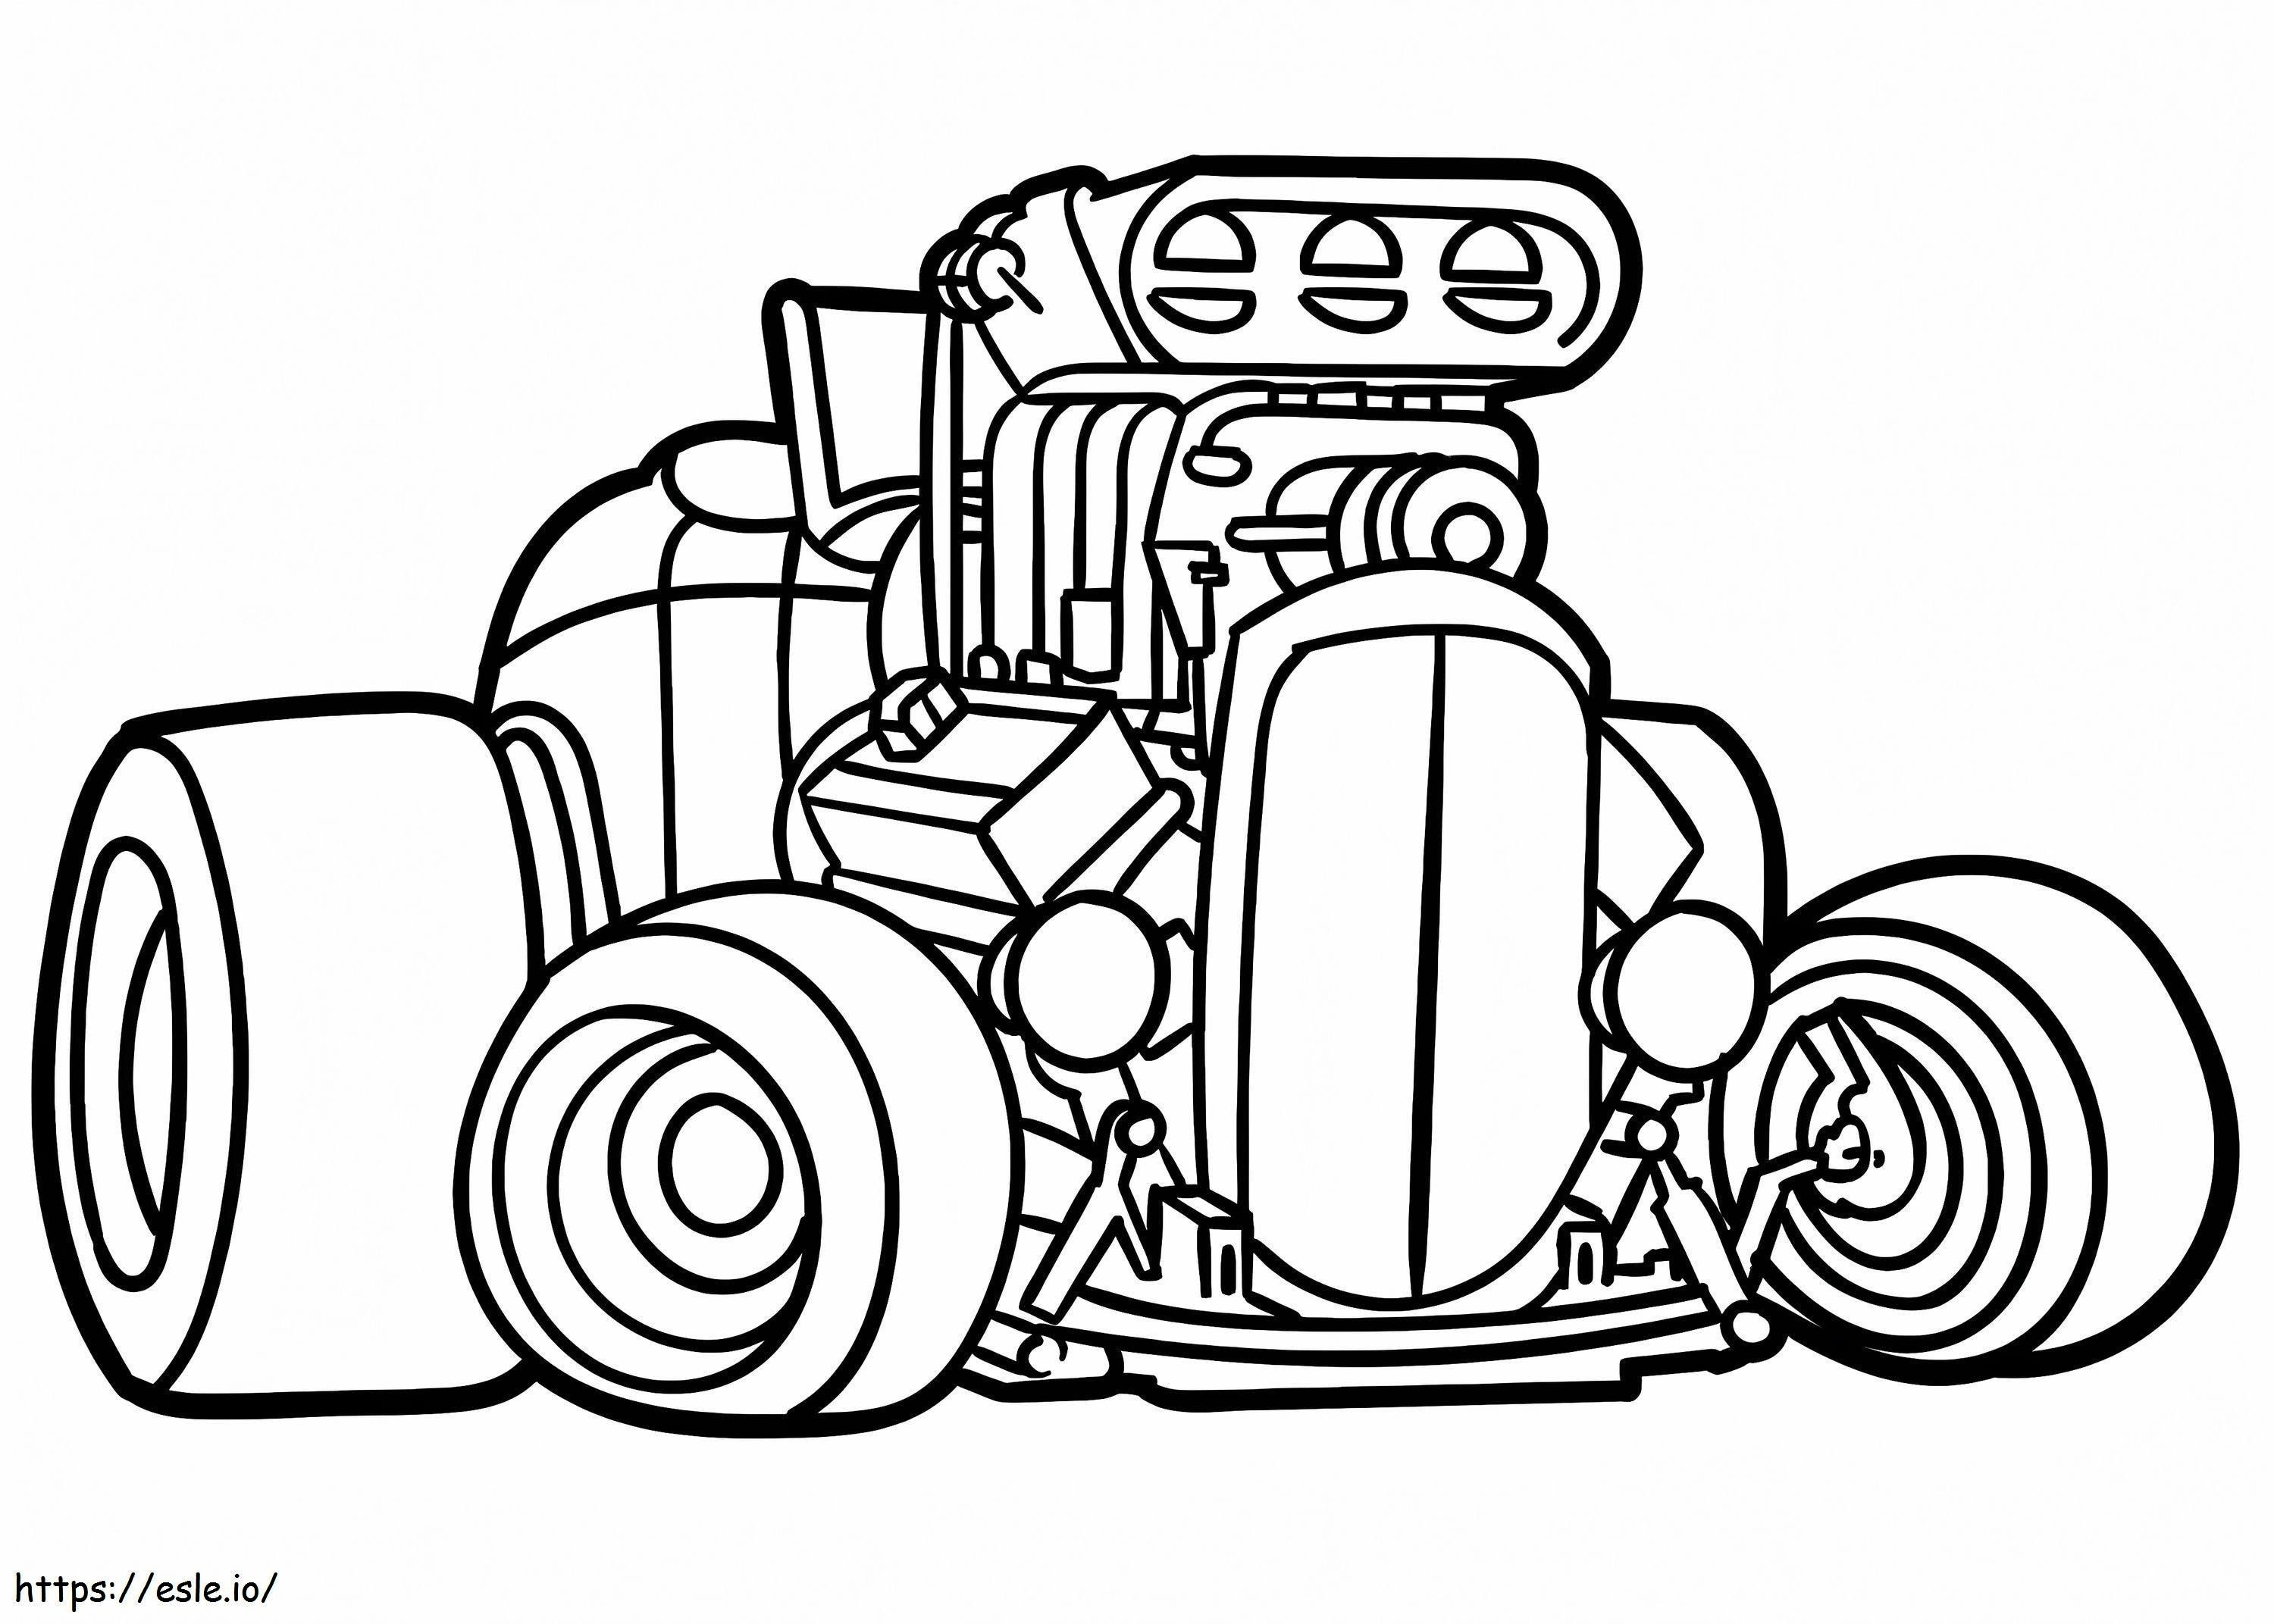 Cool Hot Rod coloring page